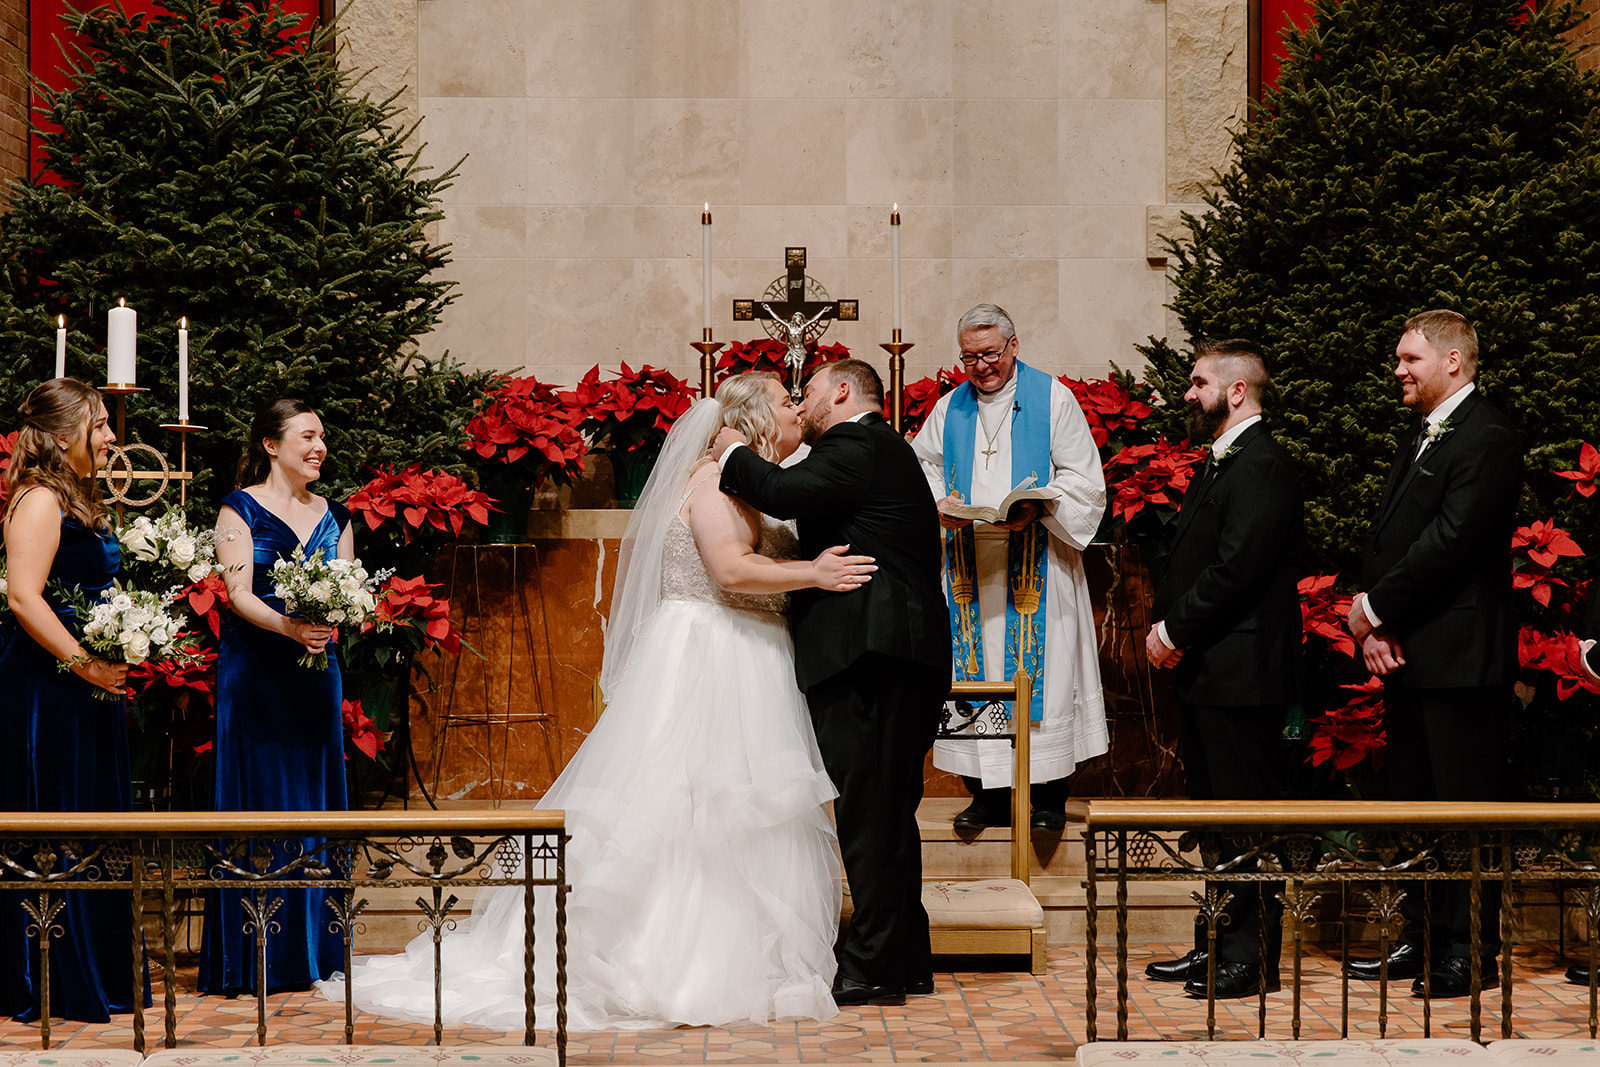 Bride and groom kiss in church during wedding ceremony